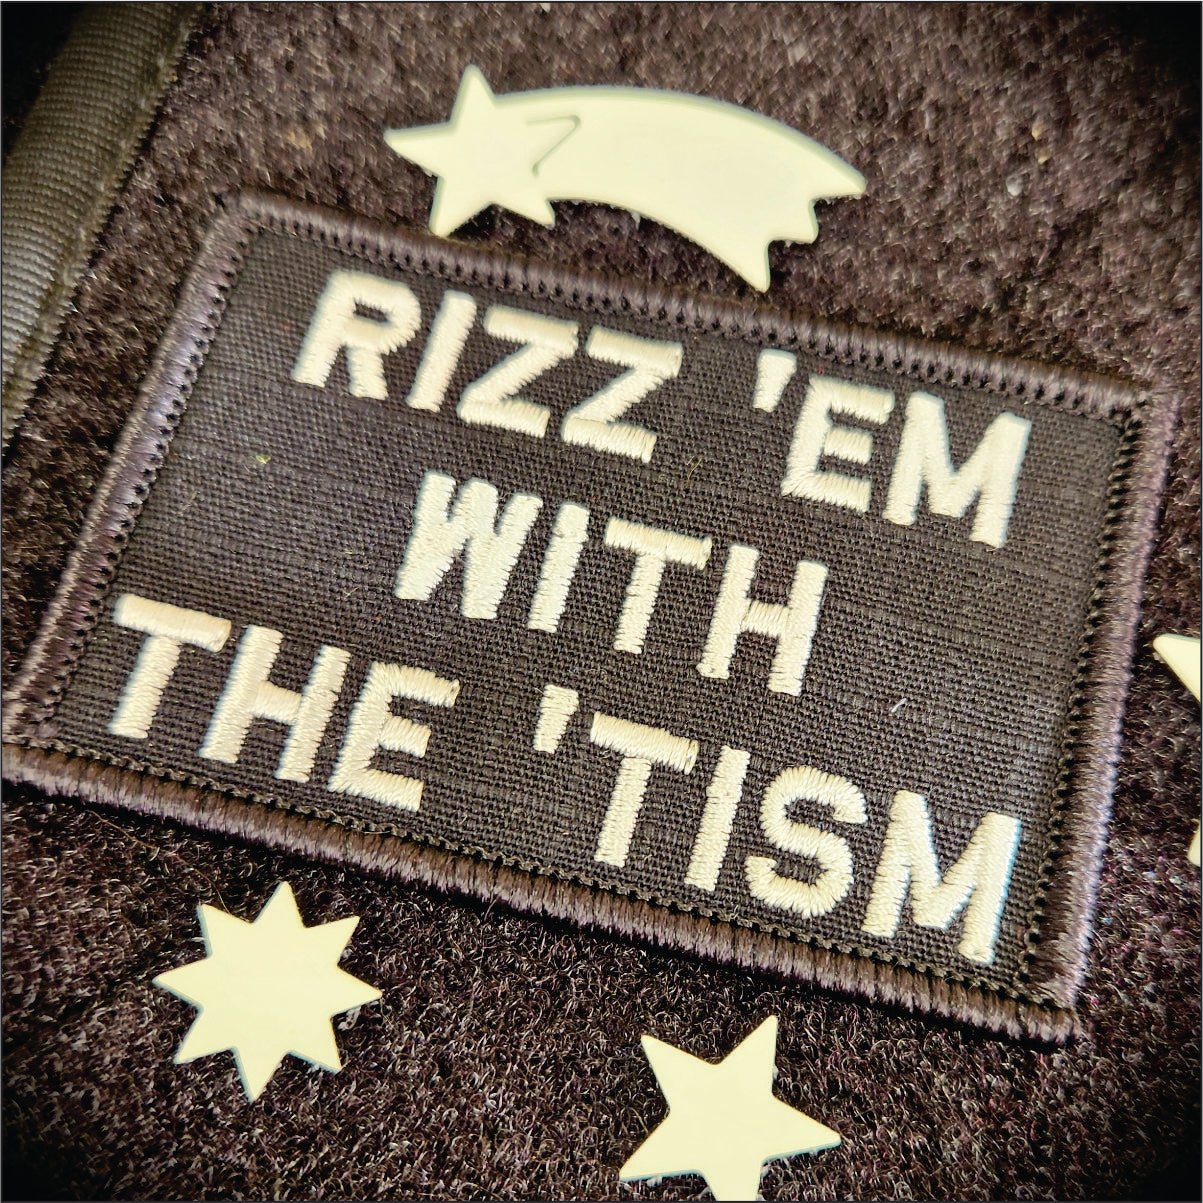 Rizz 'Em With The 'Tism Playful Unique Gen Z Style Embroidered Patch - 2x3 inches